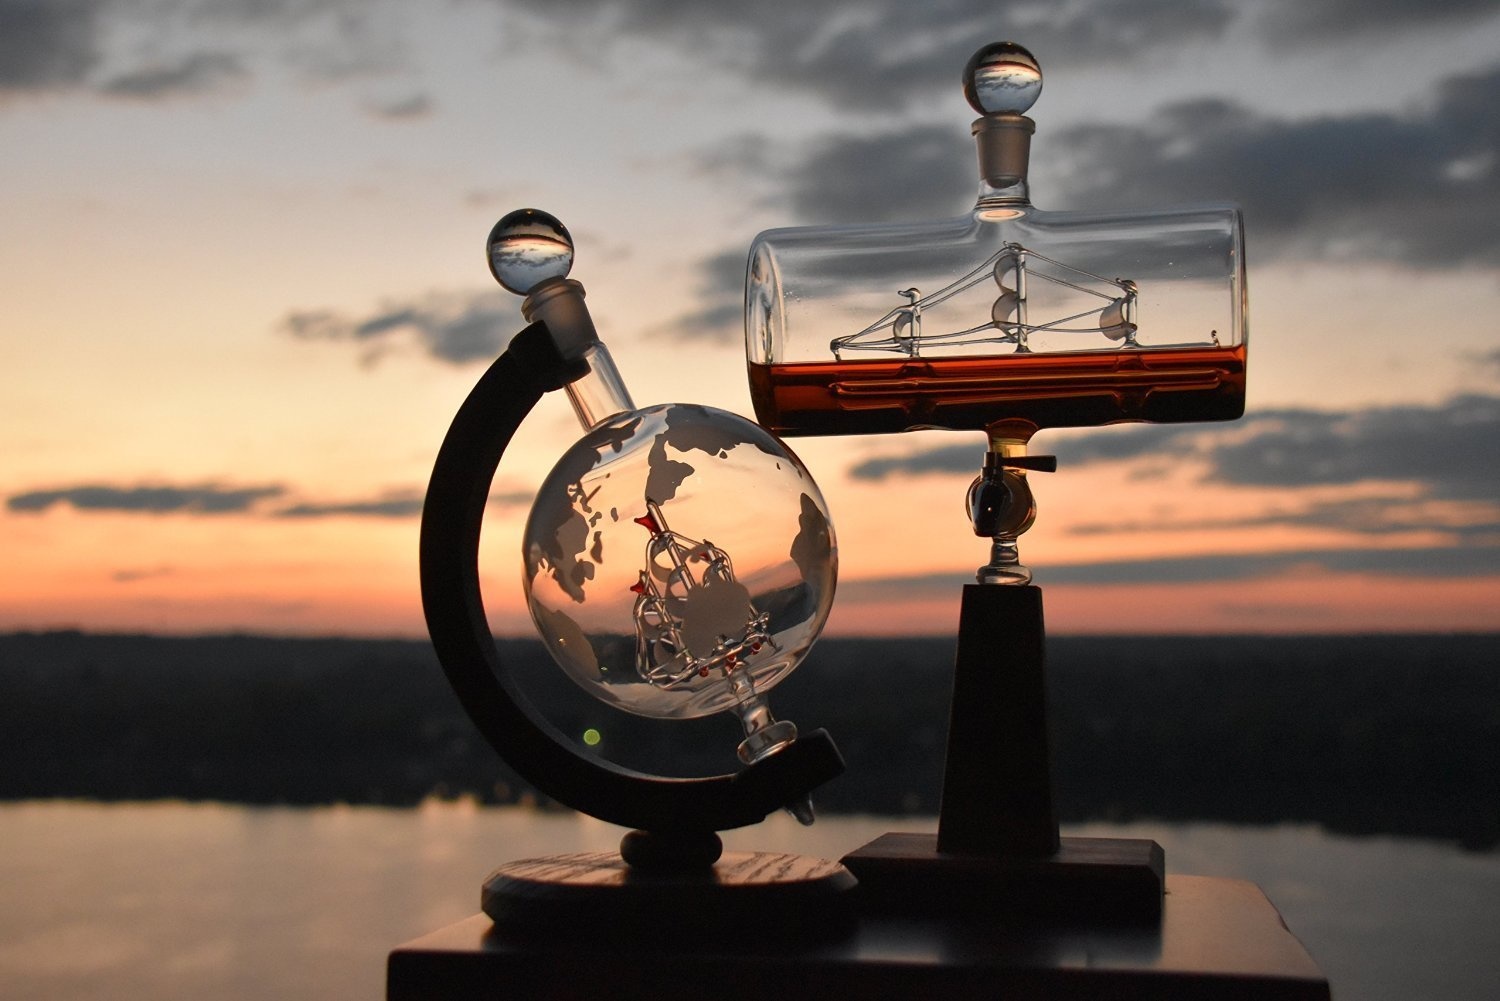 Gift one of these travel-themed bourbon decanters to a loved one. Handcrafted in Kentucky, these pieces are timeless and useful, and can be used to house things like mouthwash for those who don't do liquor.